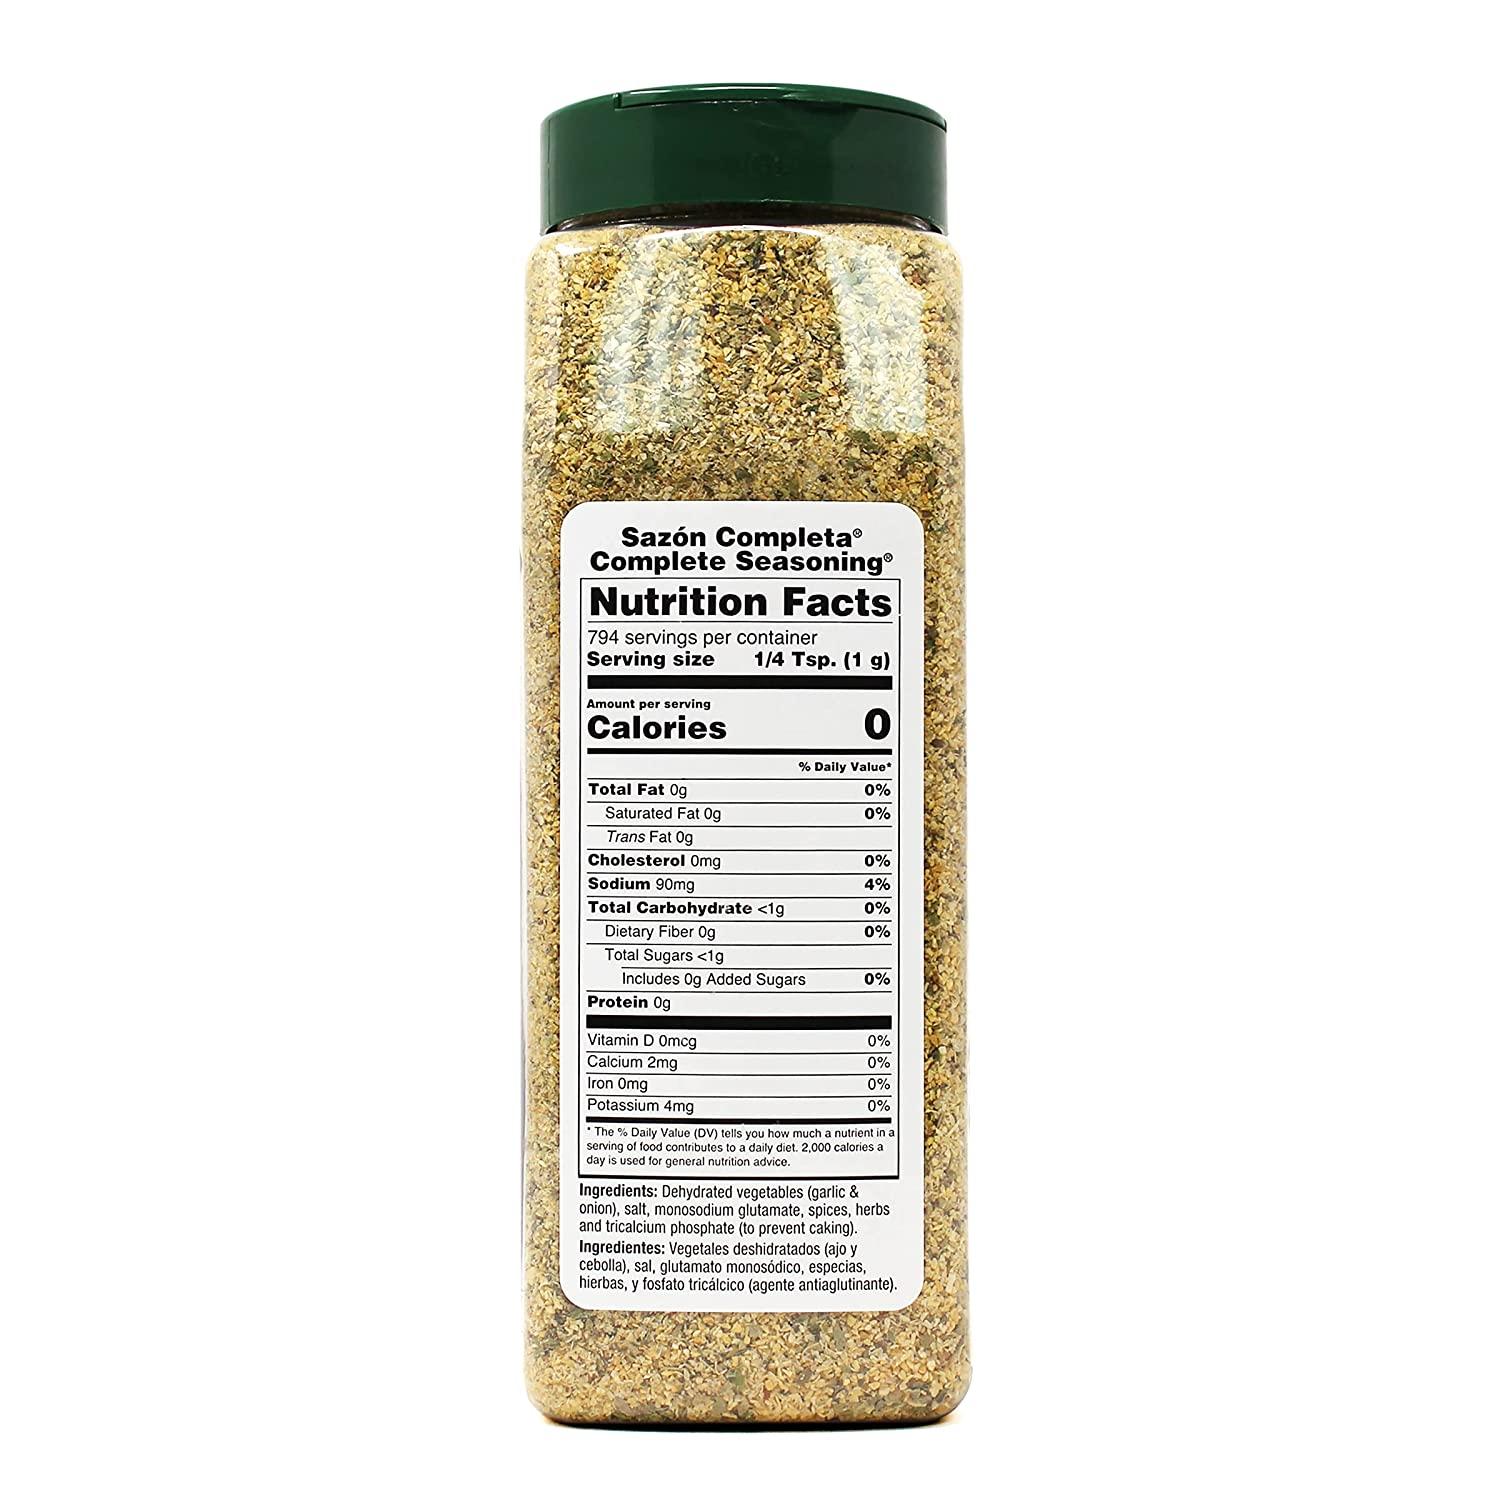 Sazon Completa complete Seasoning From the Blends of the Americas